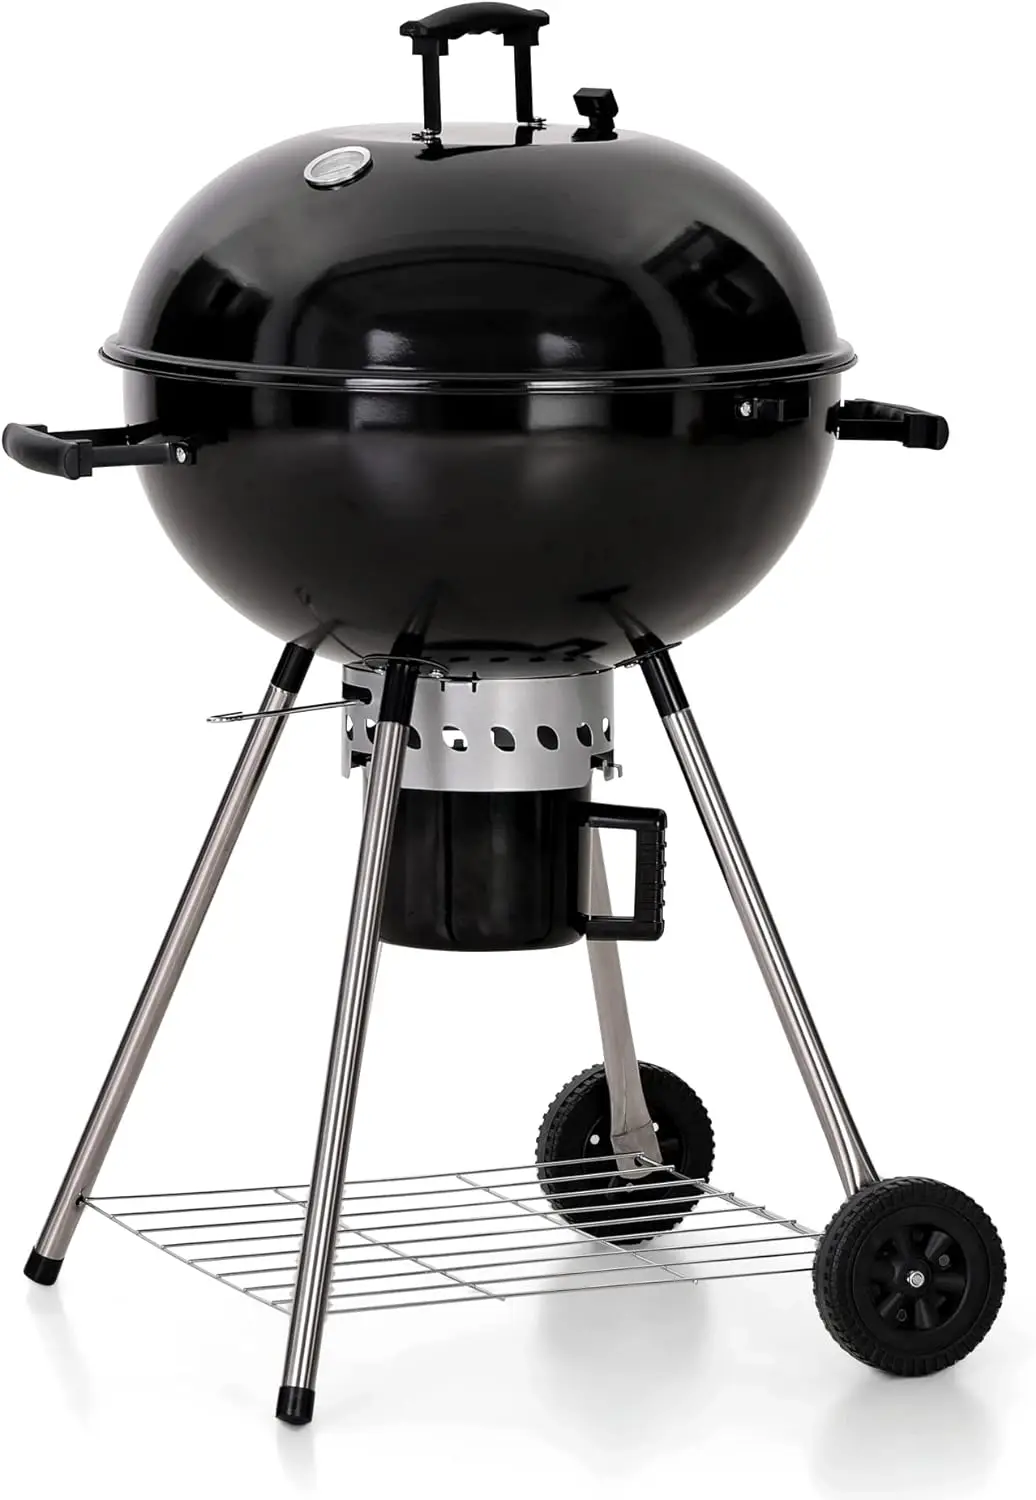 

22" Charcoal Grill, Porcelain-Enameled Lid and Bowl with Slide Out Ash Catcher for BBQ, Patio, Backyard, Picnic, Black